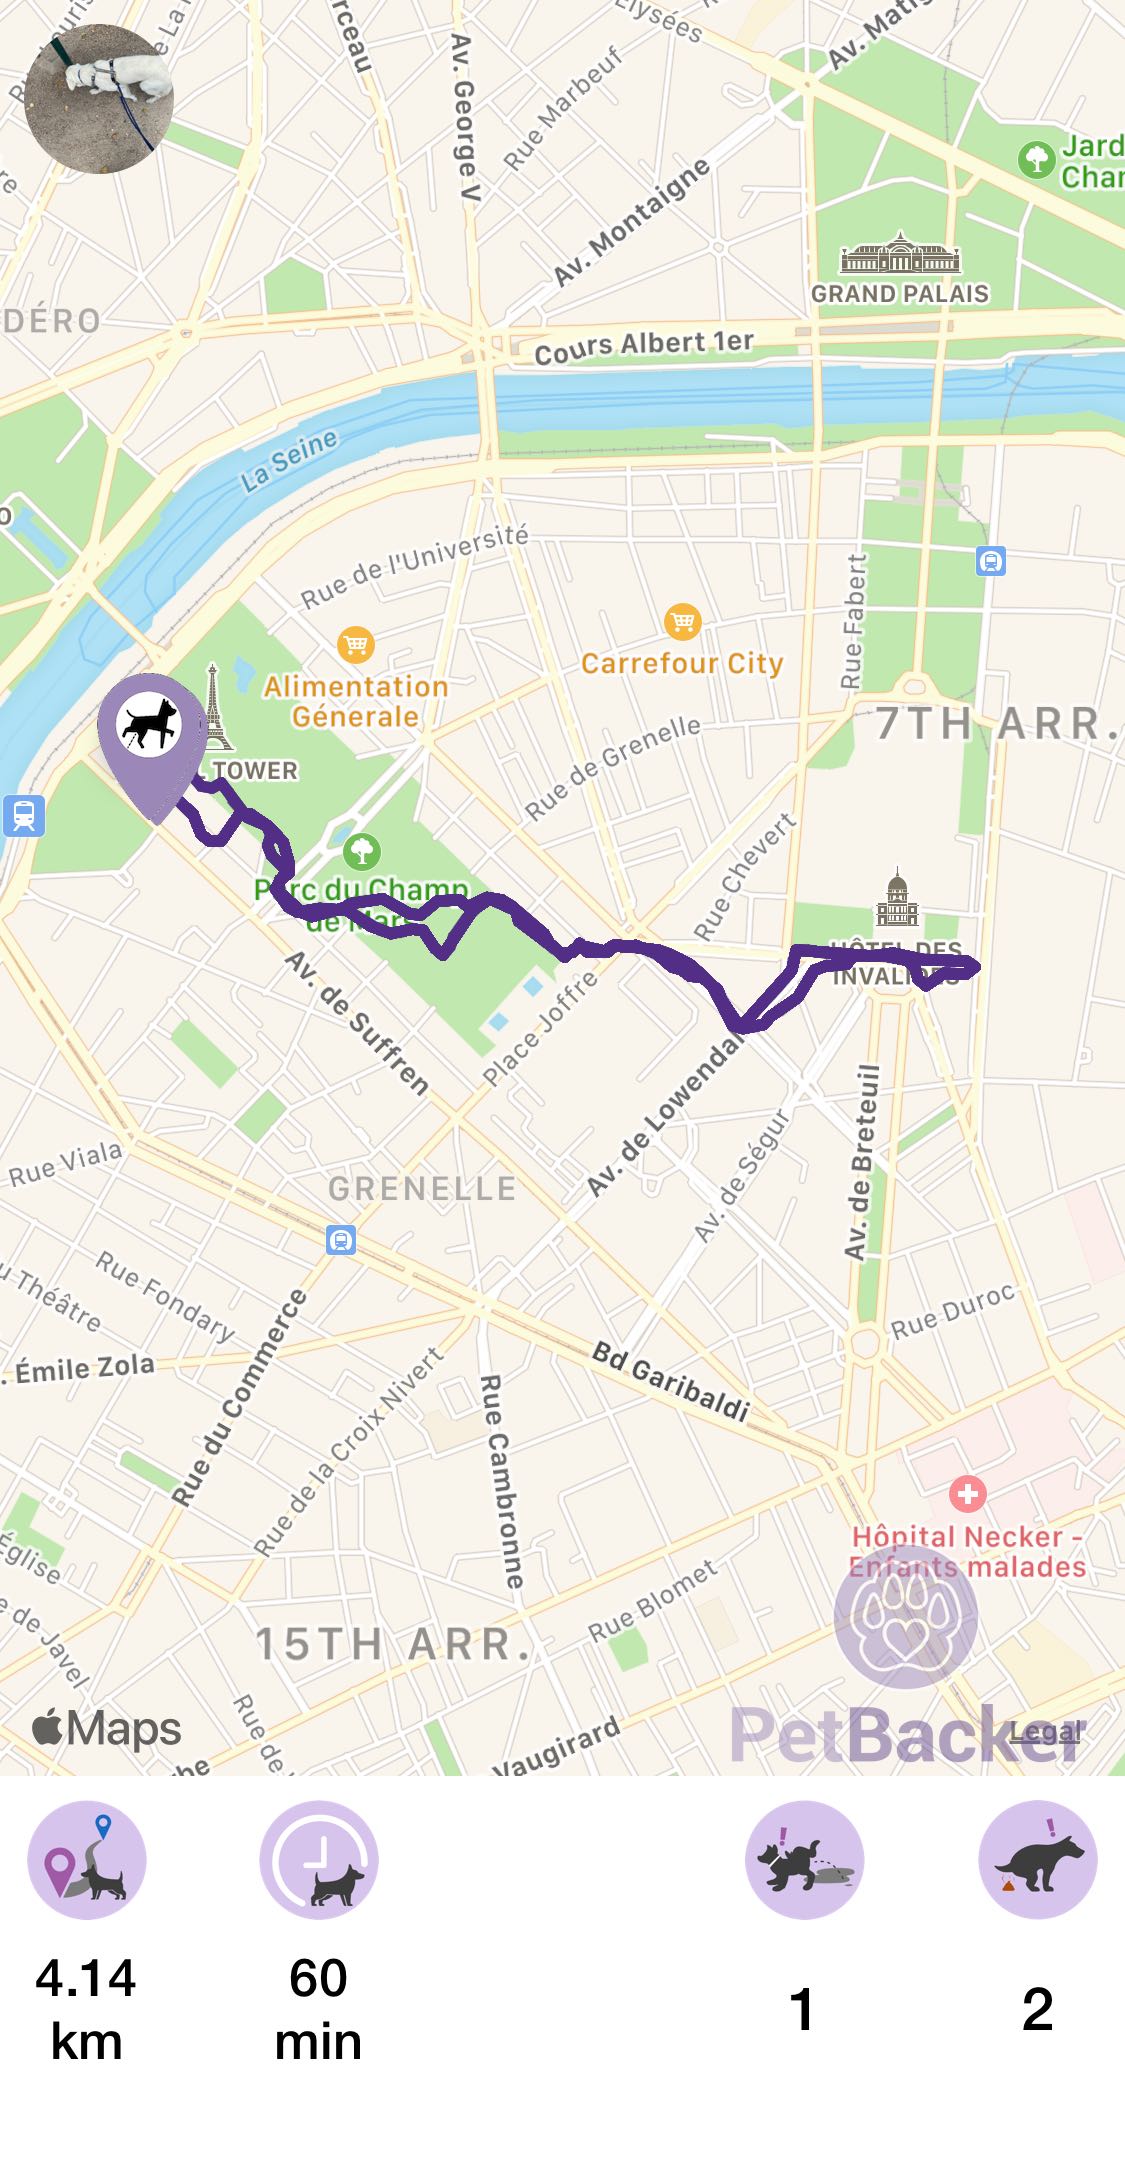 Just completed pet walking of 4.14 km